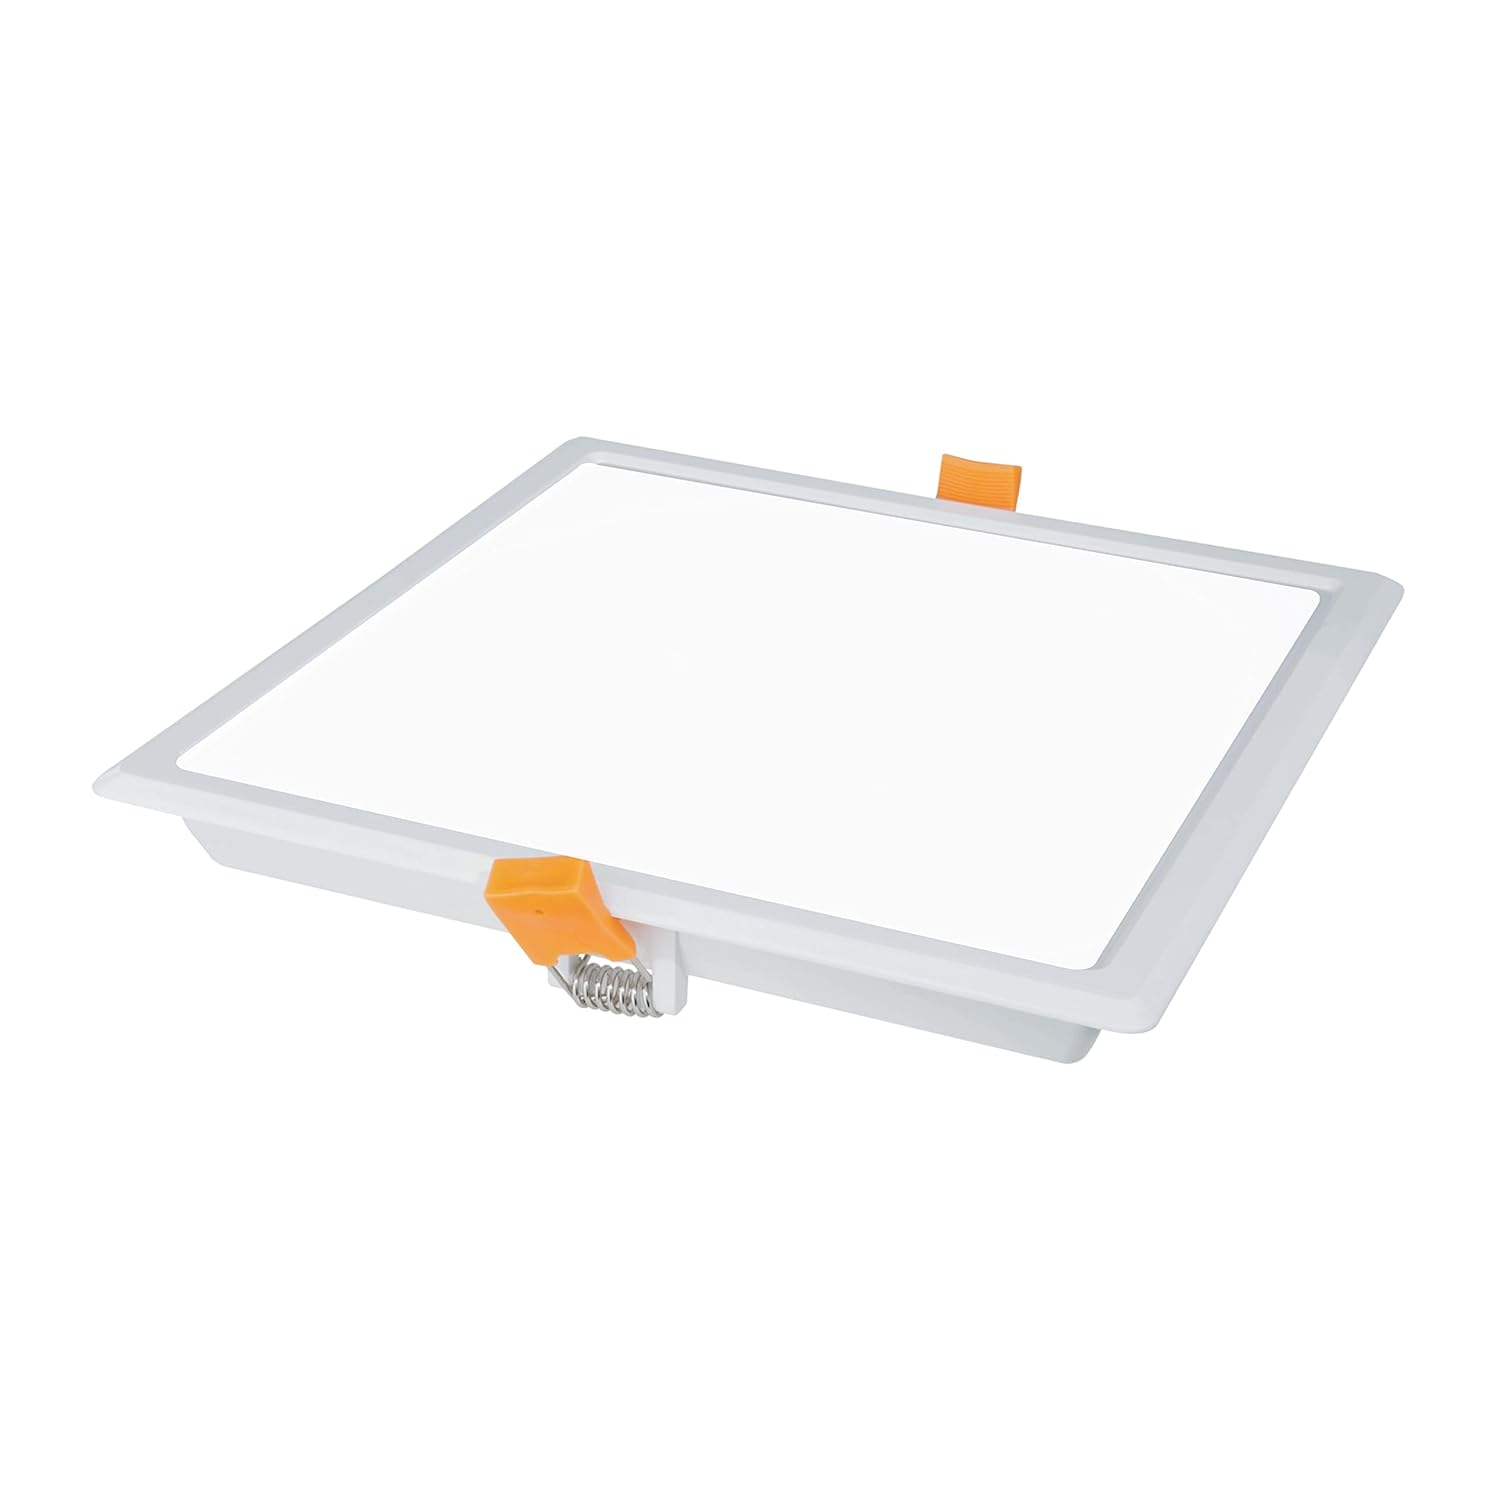 Orient 15W Square 3 in 1 LED Panel Light  (ColorCool White,Warm White-,Natural White)